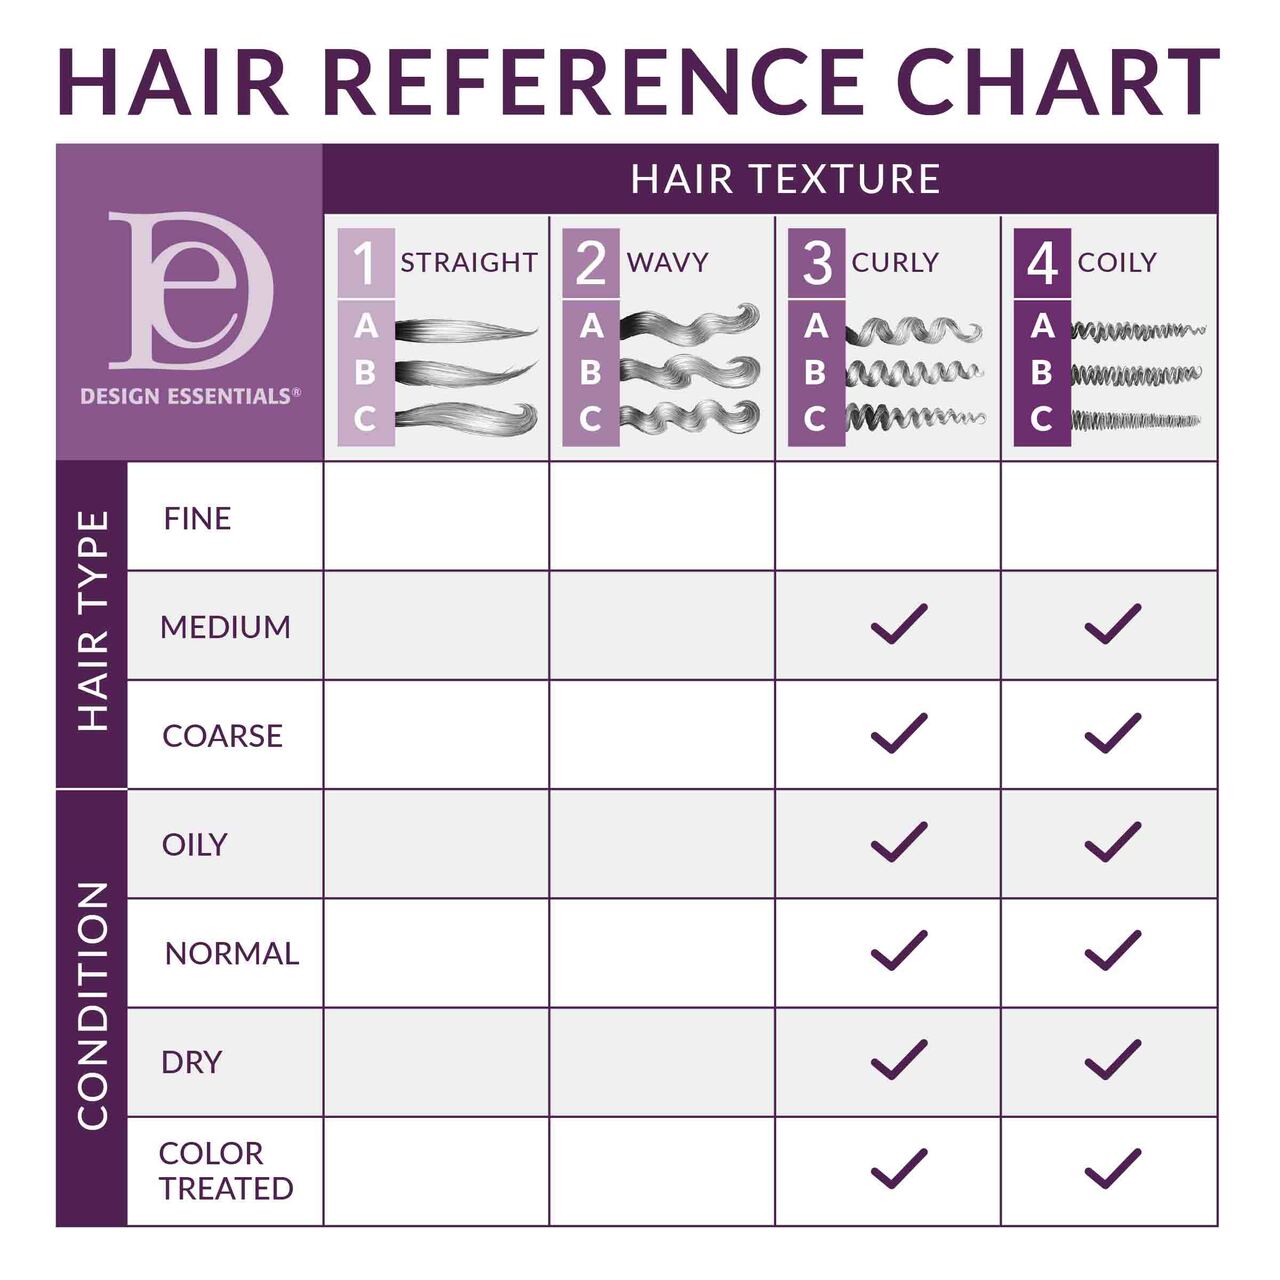 Twist_Set_Setting_Lotion_-_Hair_Reference_Chart__64725.1581974746